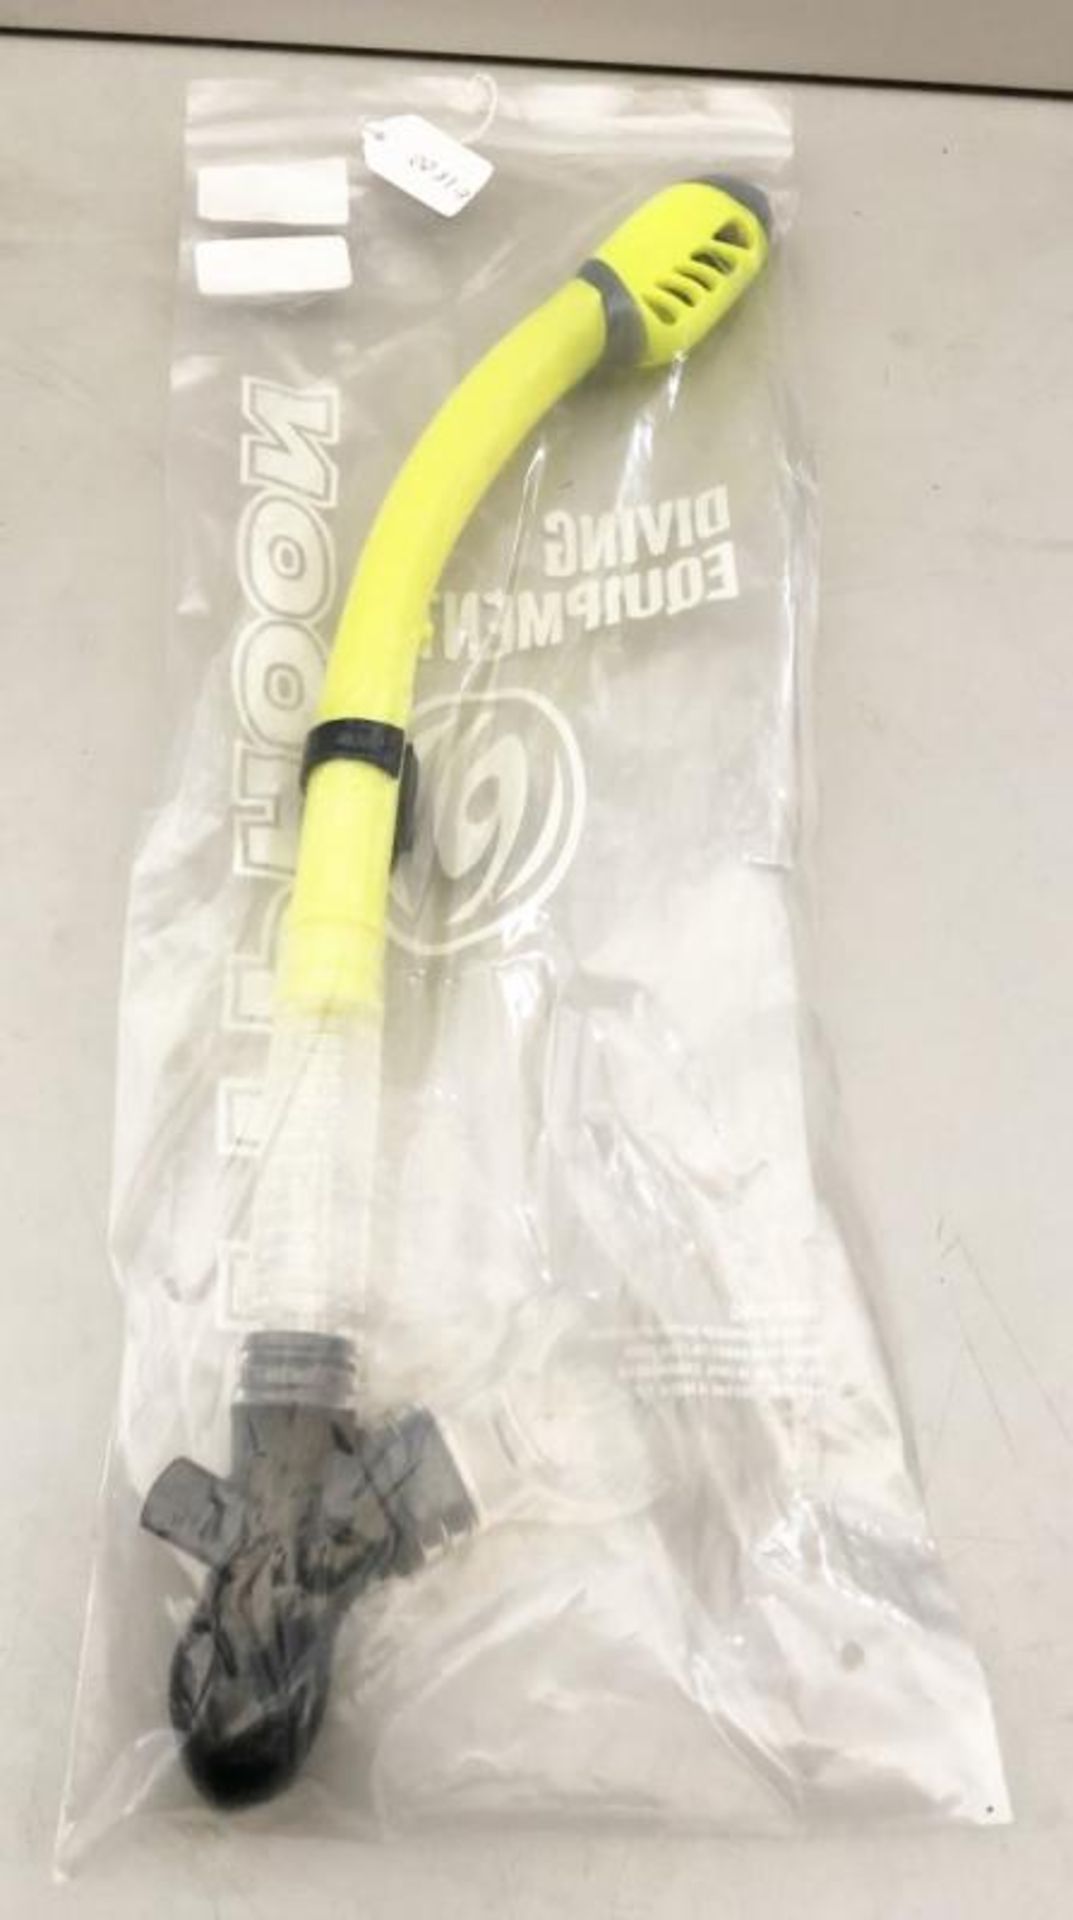 34 x Branded Diving Snorkel's - CL349 - Altrincham WA14 - Brand New! - Image 25 of 30